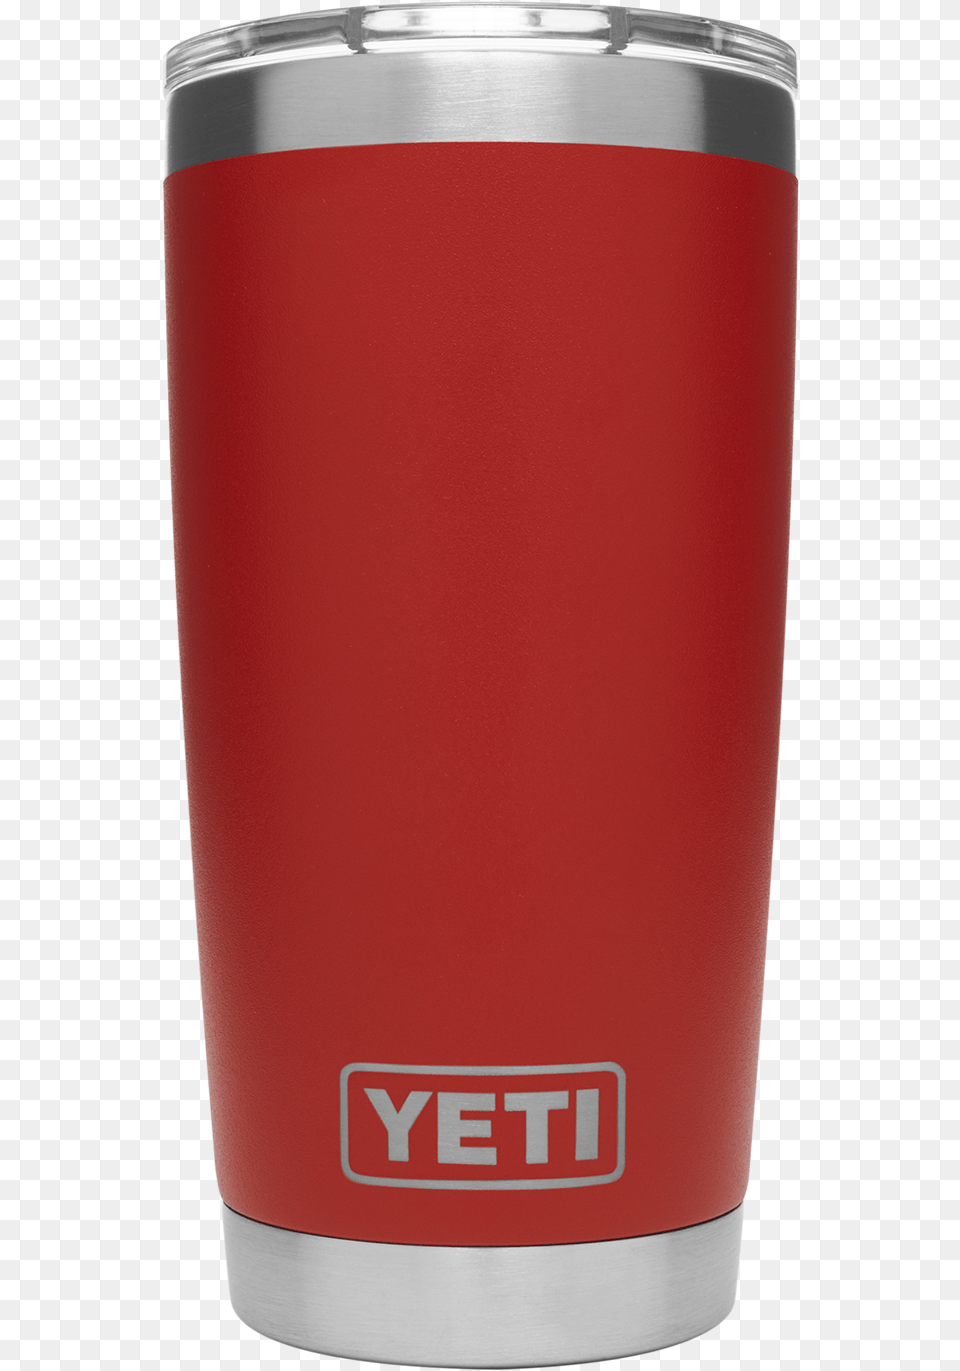 Yeti 20 Oz Red, Steel, Can, Tin Png Image